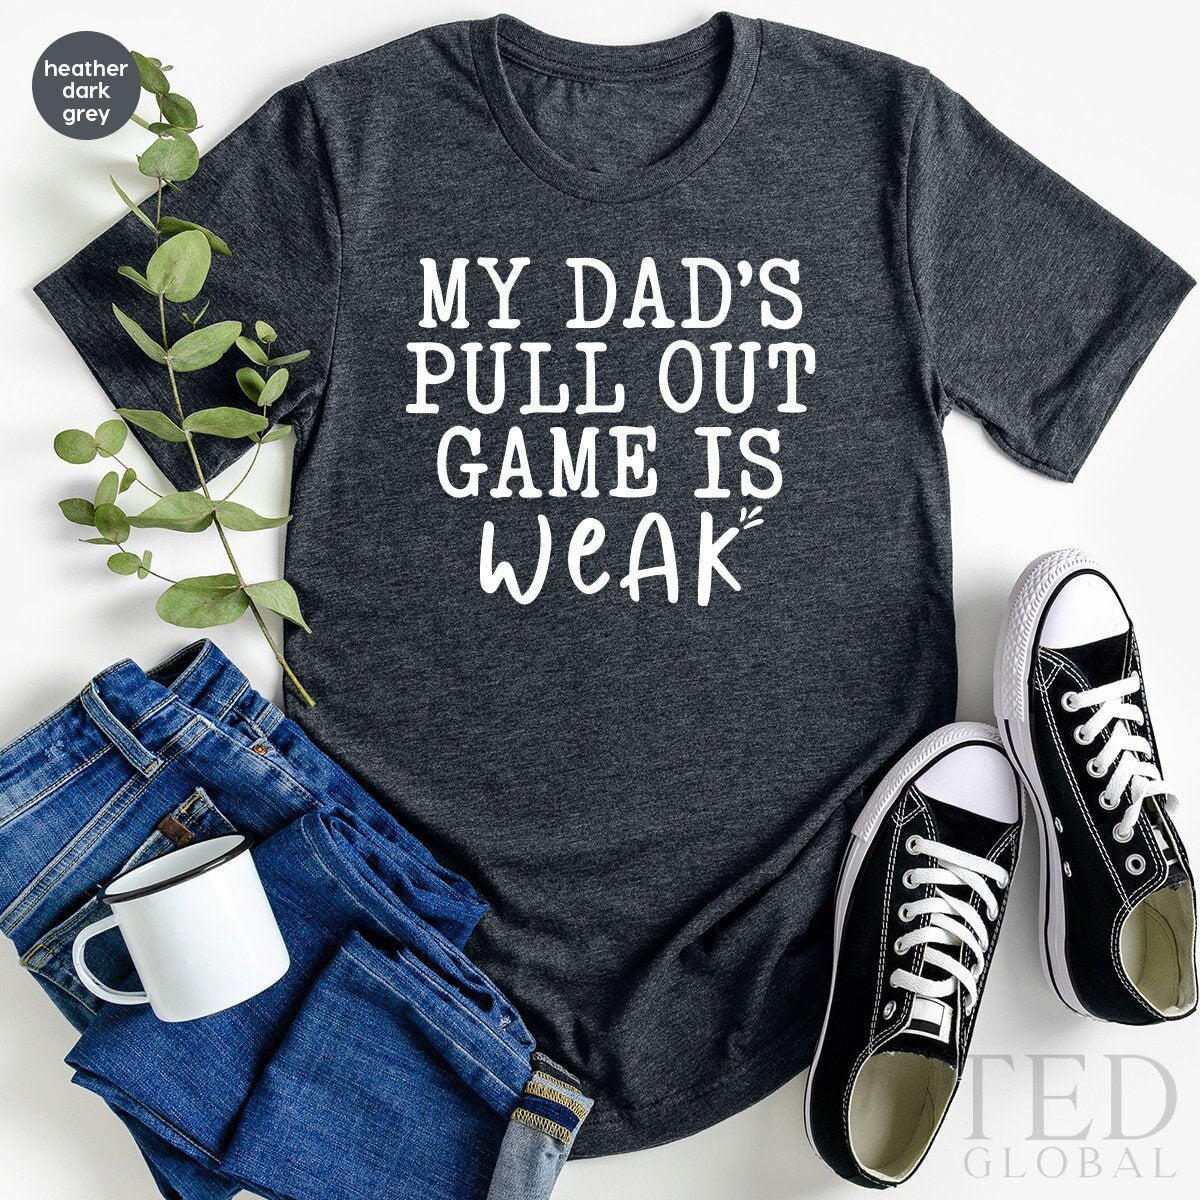 Cute Baby T-Shirt, Funny Matching Shirt, Son And Dad Shirt, Gamer Daddy Tshirt, My Dads Pull Out Game Is Weak Shirt, Fathers Day T Shirt - Fastdeliverytees.com